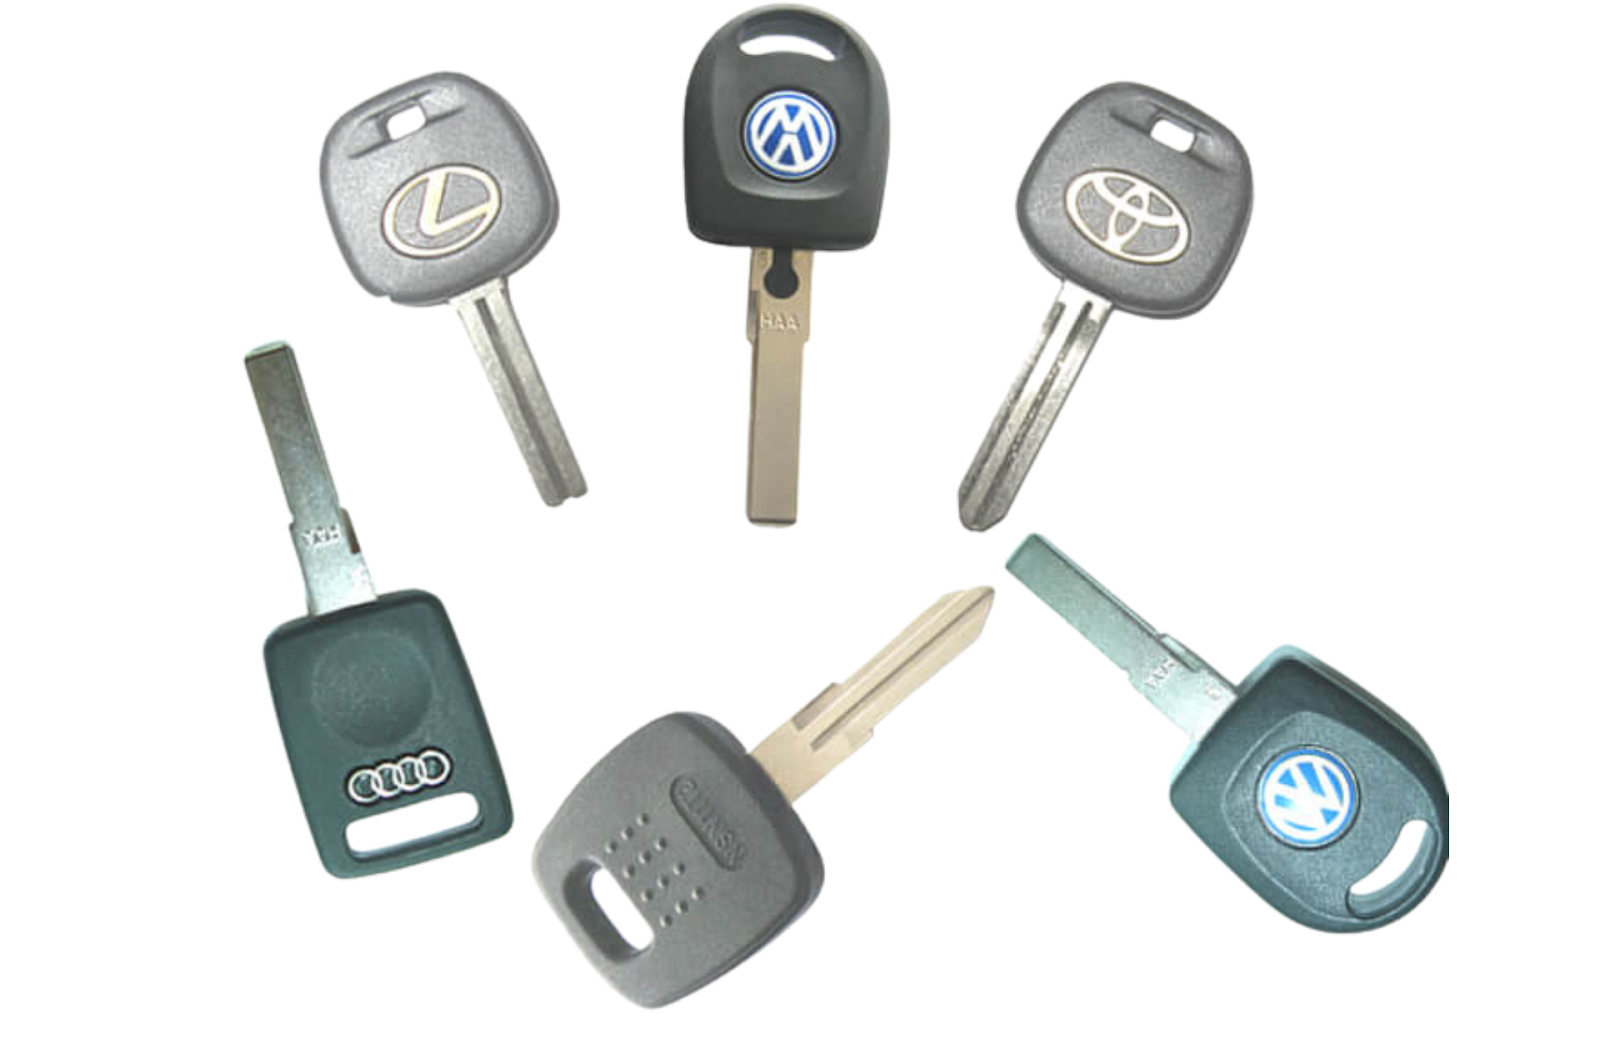 What Are The Types Of Transponder Keys?